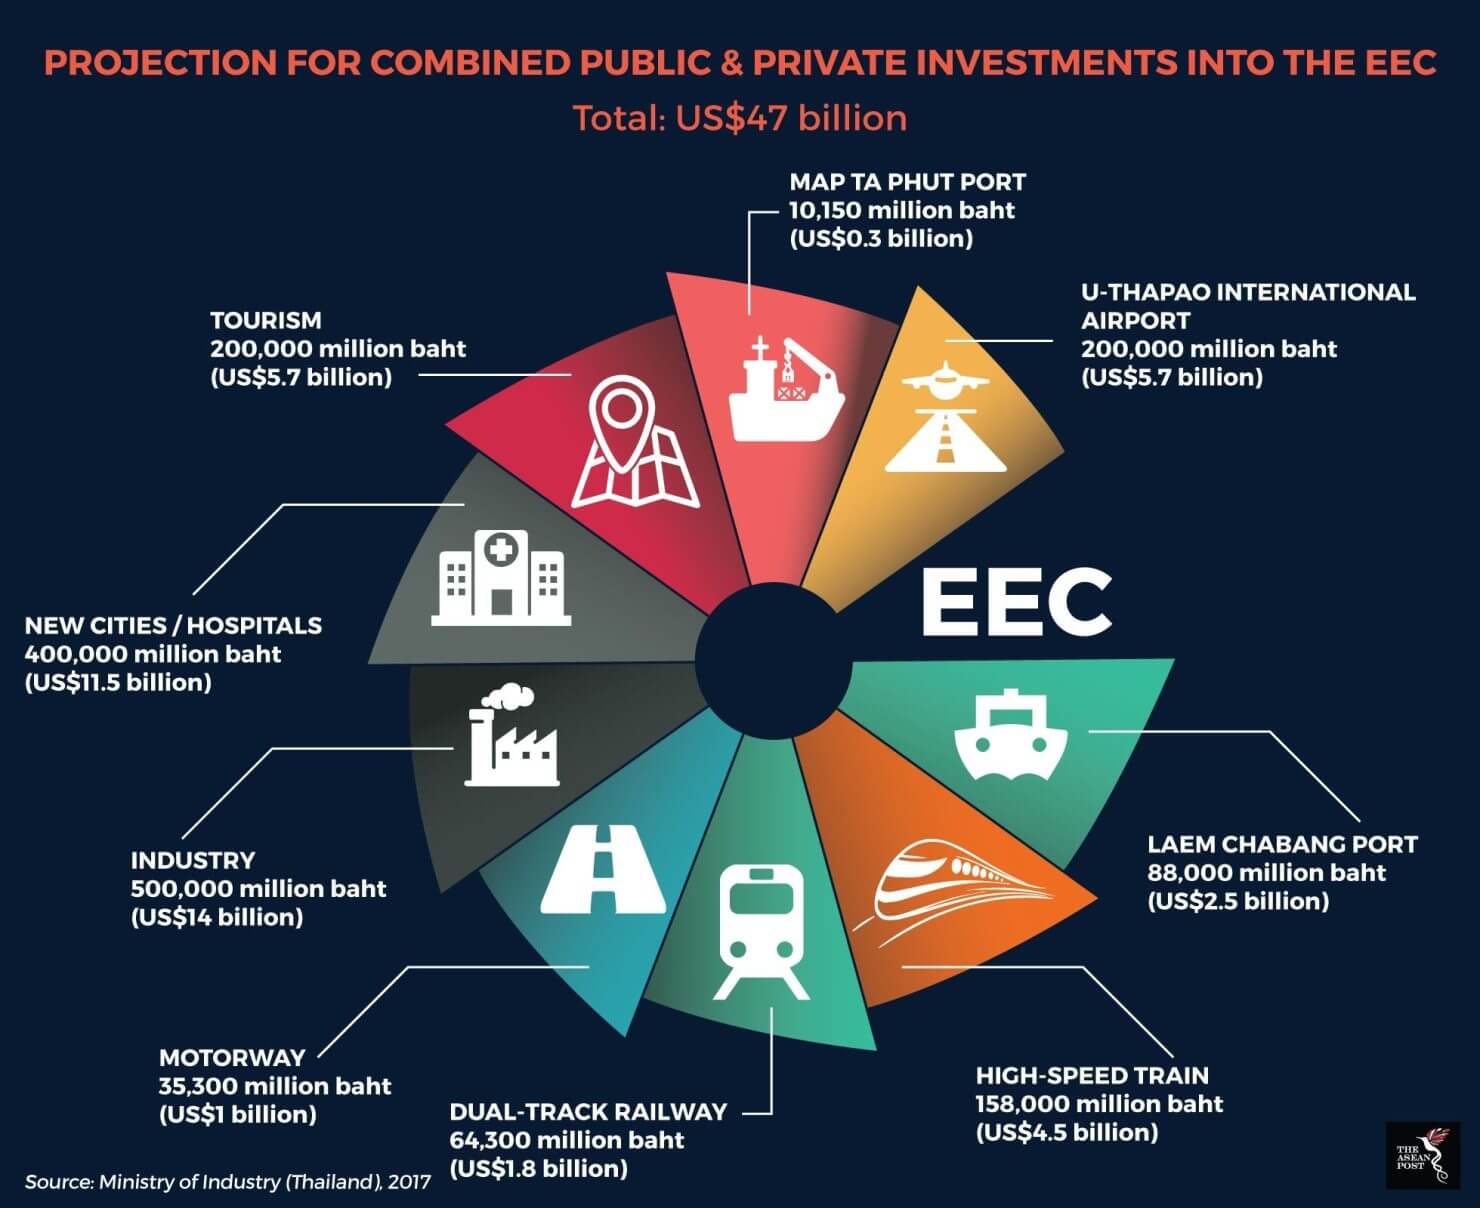 Four major EEC infrastructure projects reviewed